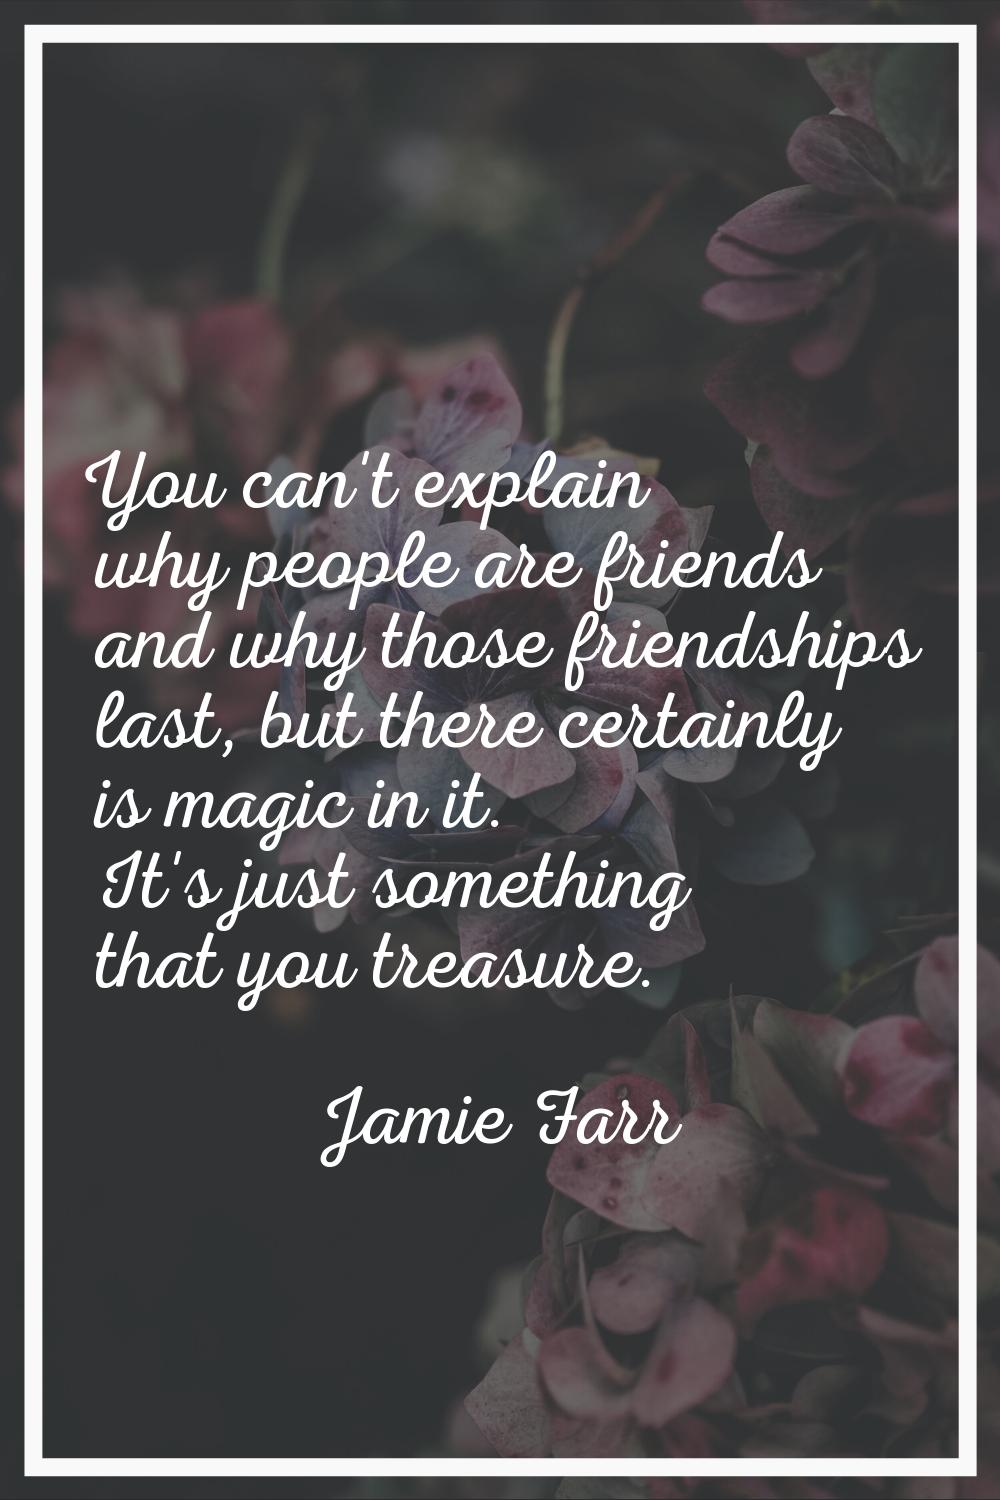 You can't explain why people are friends and why those friendships last, but there certainly is mag